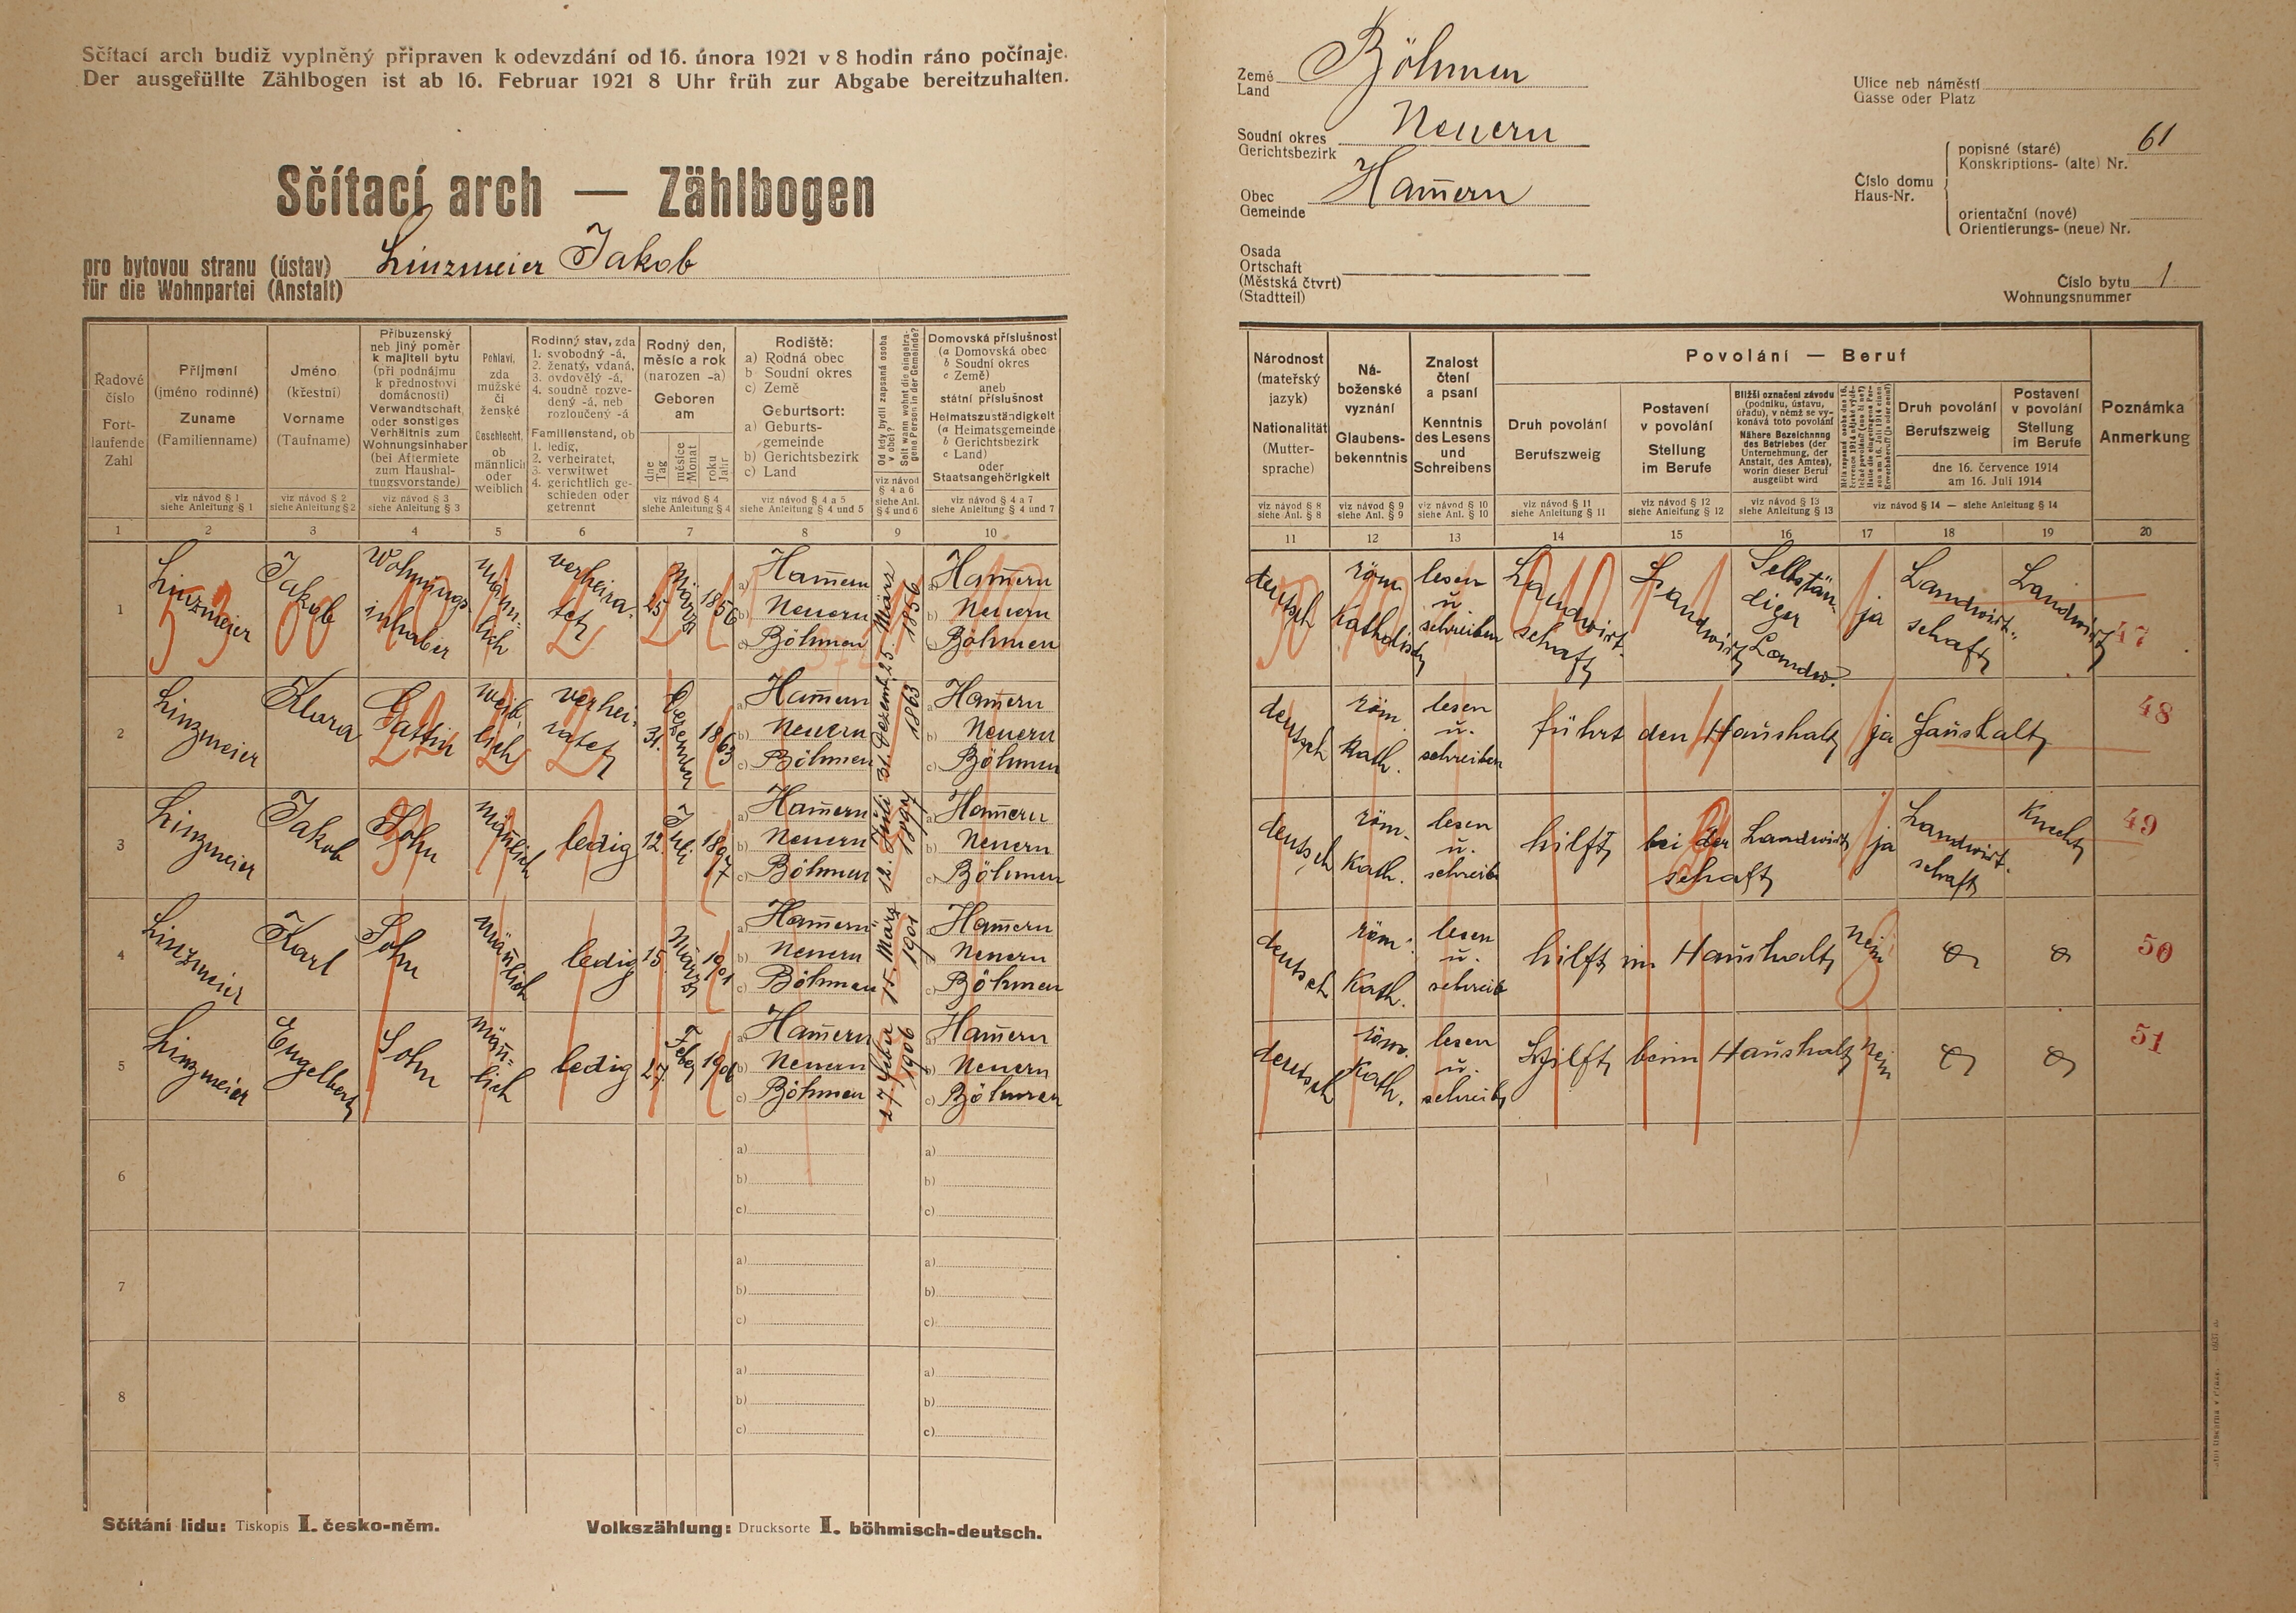 2. soap-kt_01159_census-1921-hamry-cp061_0020